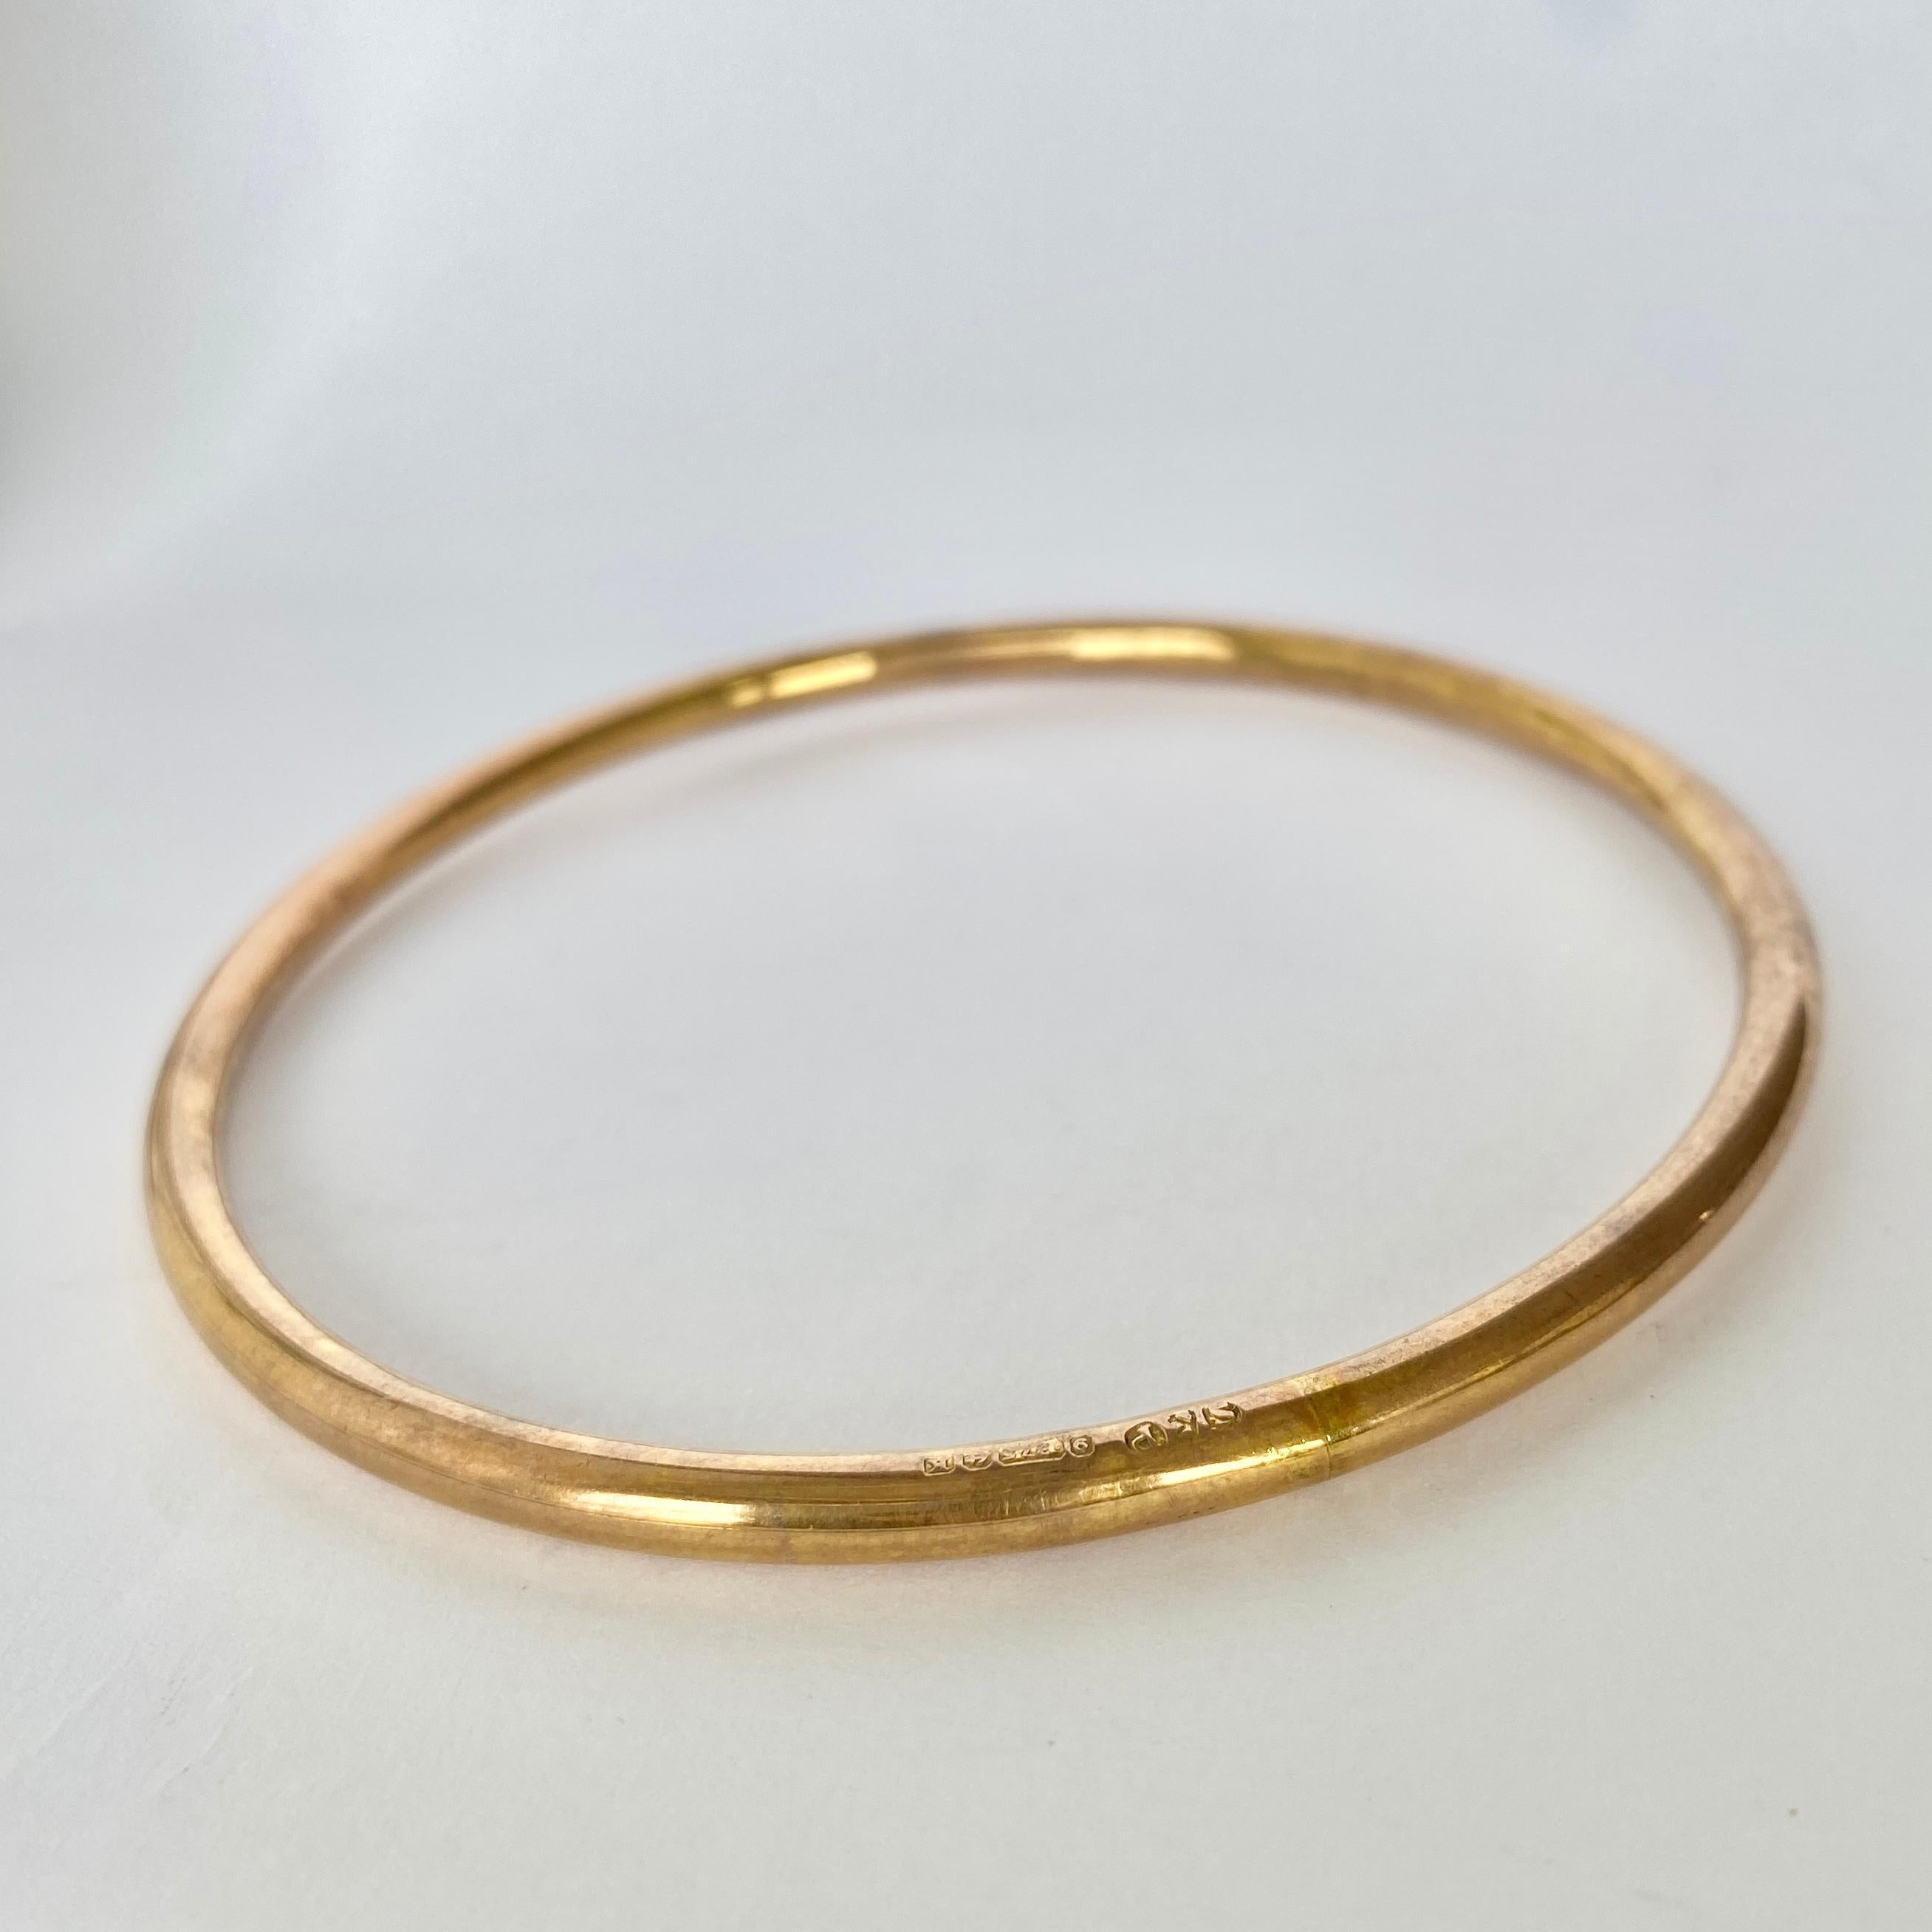 This arm bangle is so so stylish! The smooth body of the bangle wraps around your arm. Fully hallmarked Birmingham 1934.

Inner Diameter: 7cm
Bangle Width: 4mm

Weight: 5.6g